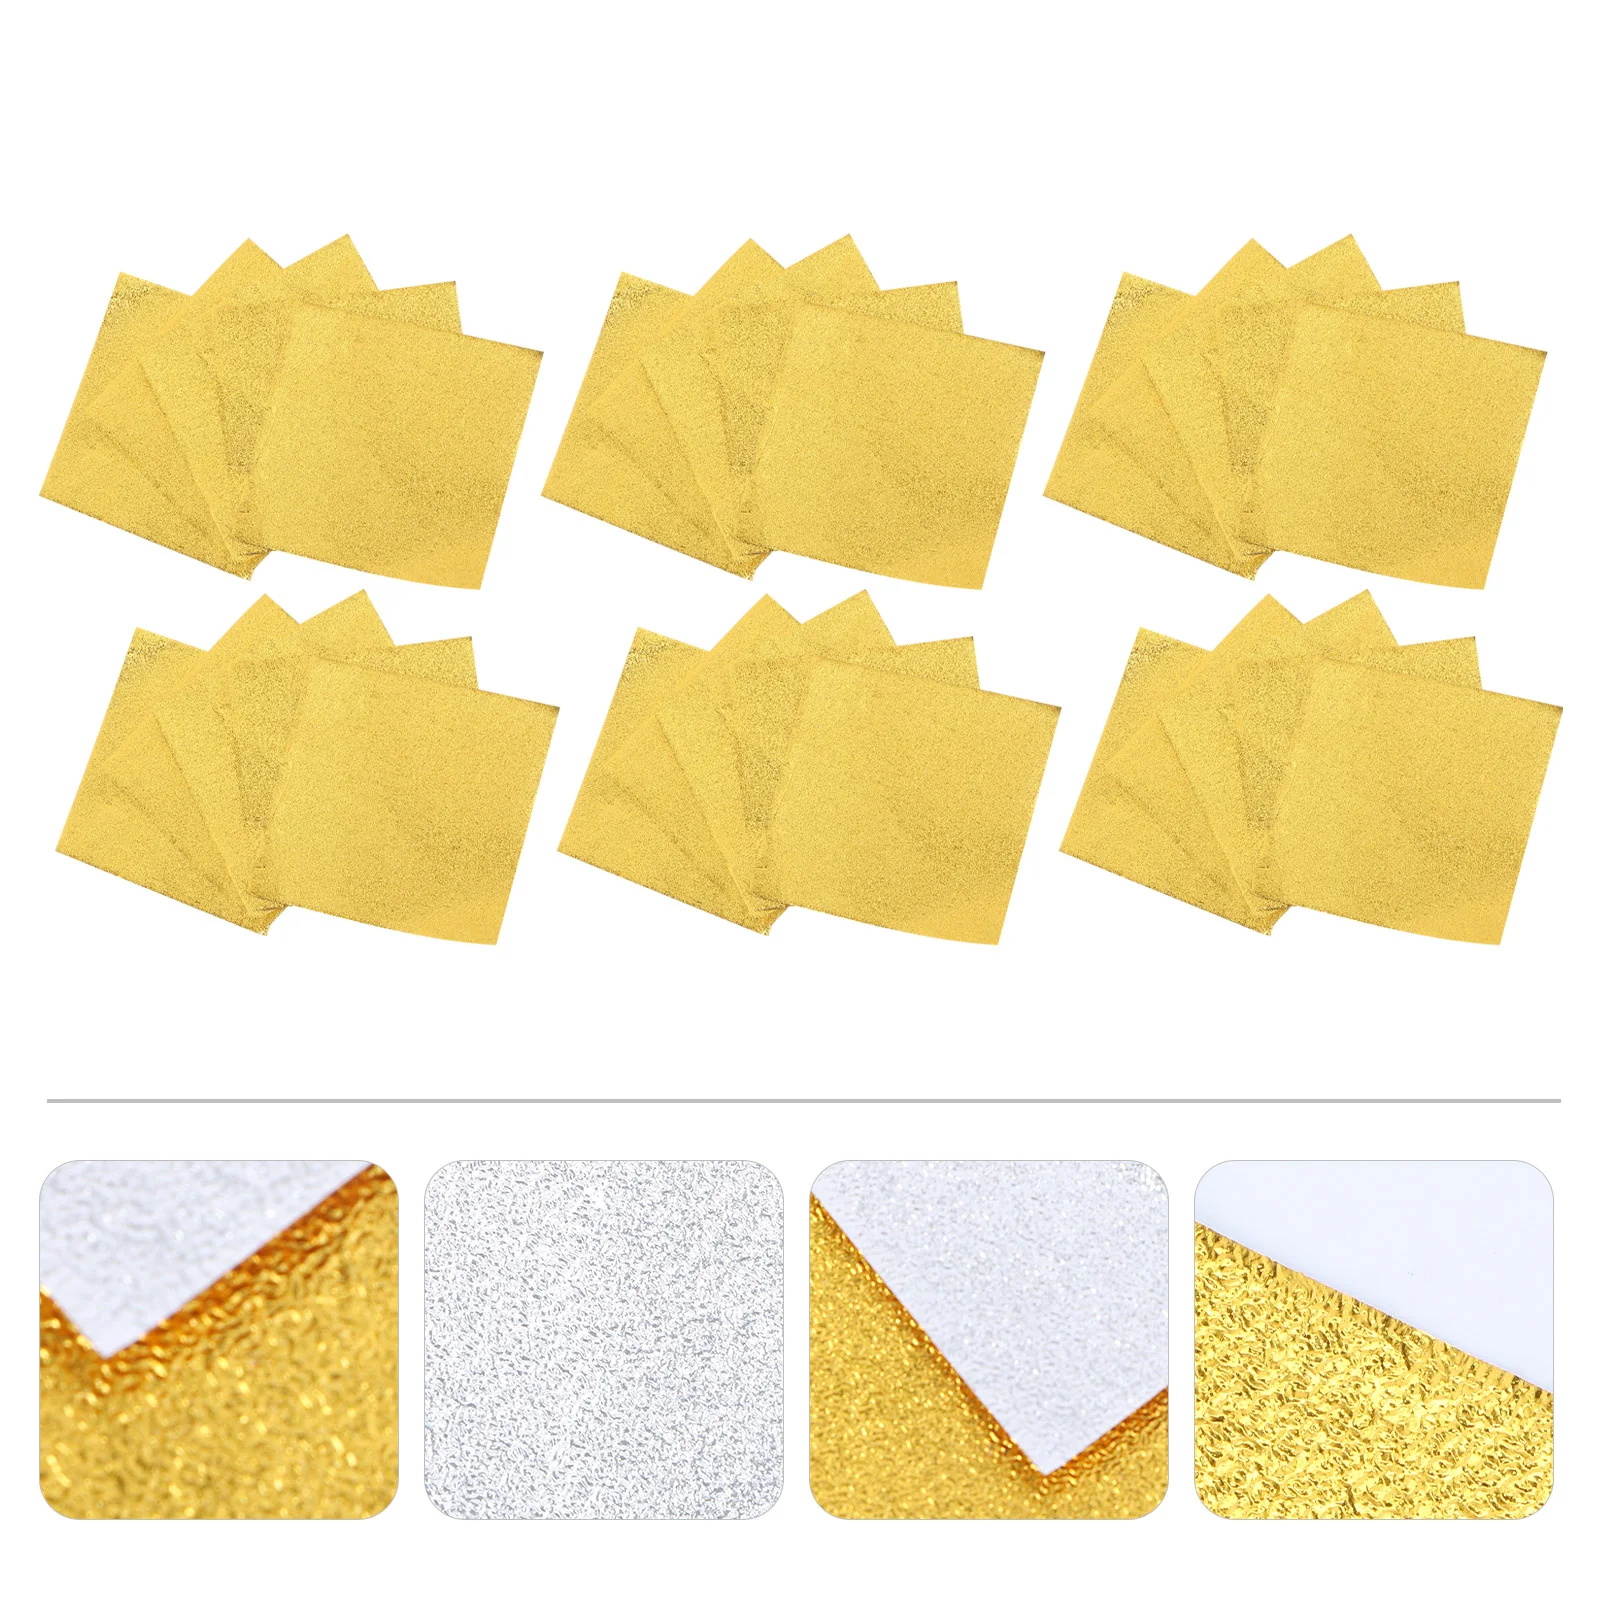 

500 Pcs Heavy Duty Foil Foil Candy Wrappers Chocolate Caramel Wrapper Foil Wrapping Paper Gold Foil Candy Paper Origami